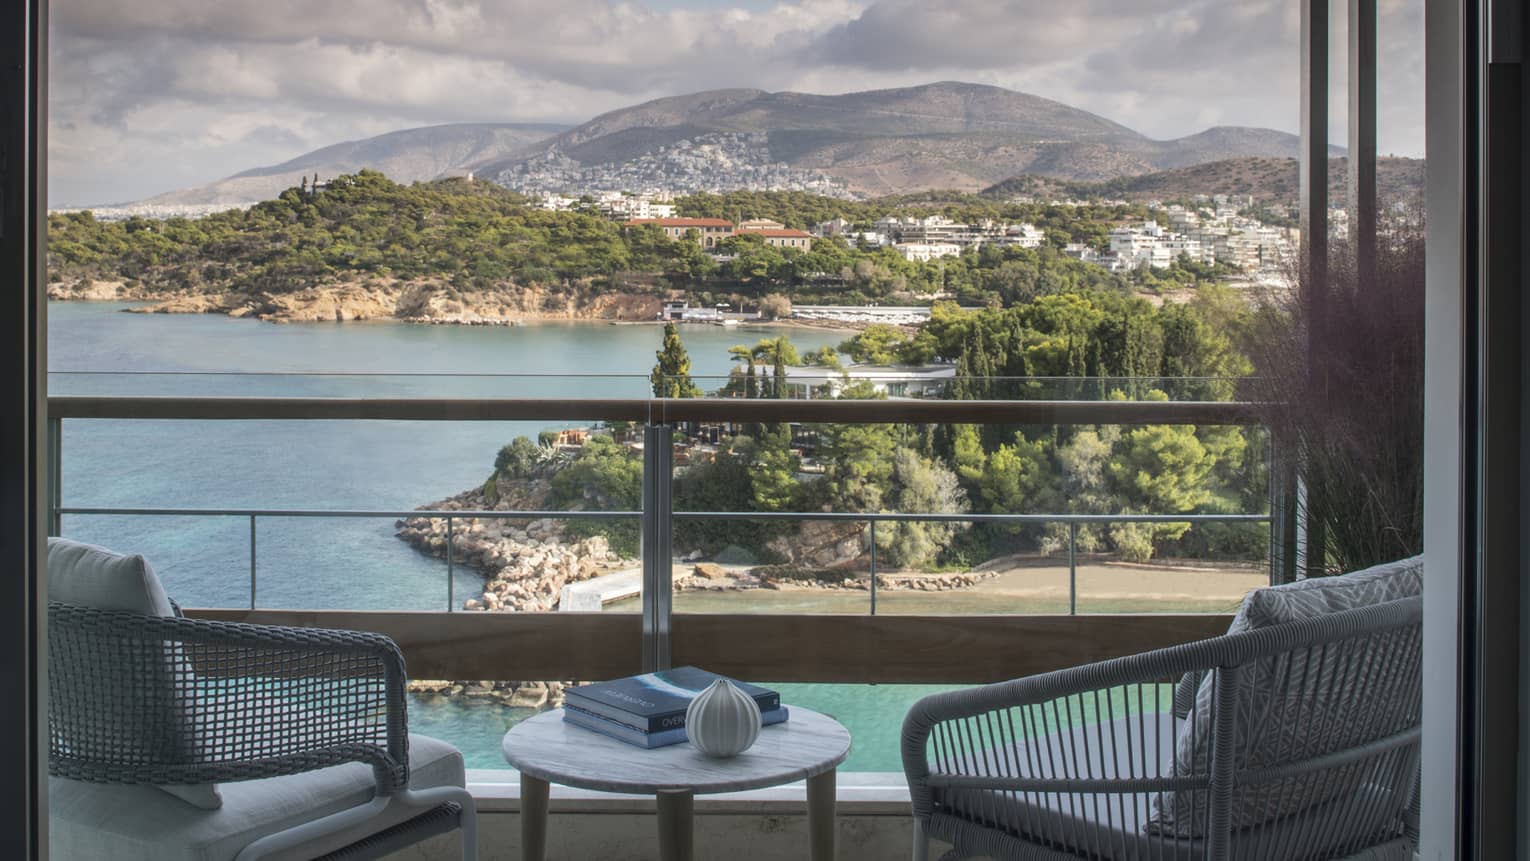 Four Seasons Astir Palace Hotel Athens balcony chairs, table with books, overlooking sea, trees, mountains